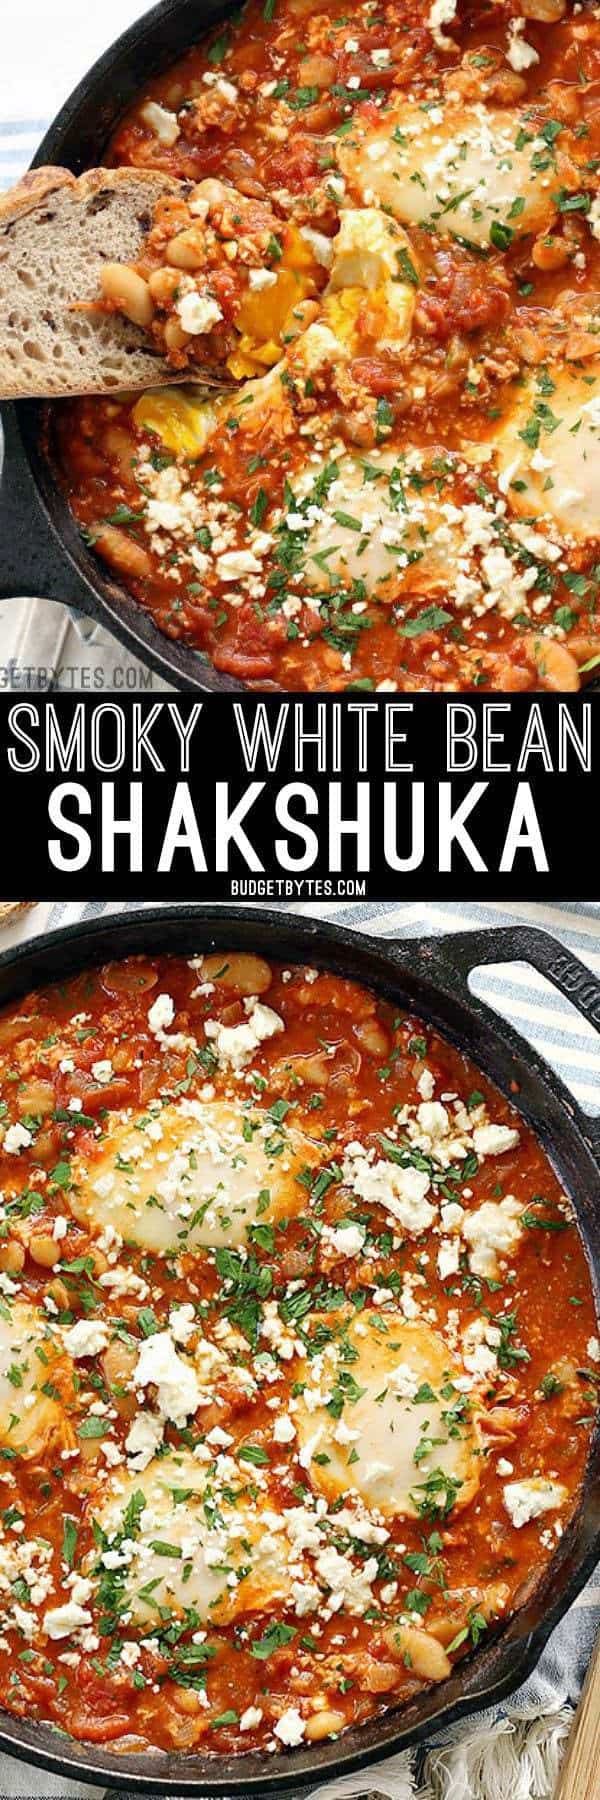 Eggs poached in a rich and smoky tomato sauce speckled with white beans, this Smoky White Bean Shakshuka is the perfect breakfast for dinner! BudgetBytes.com